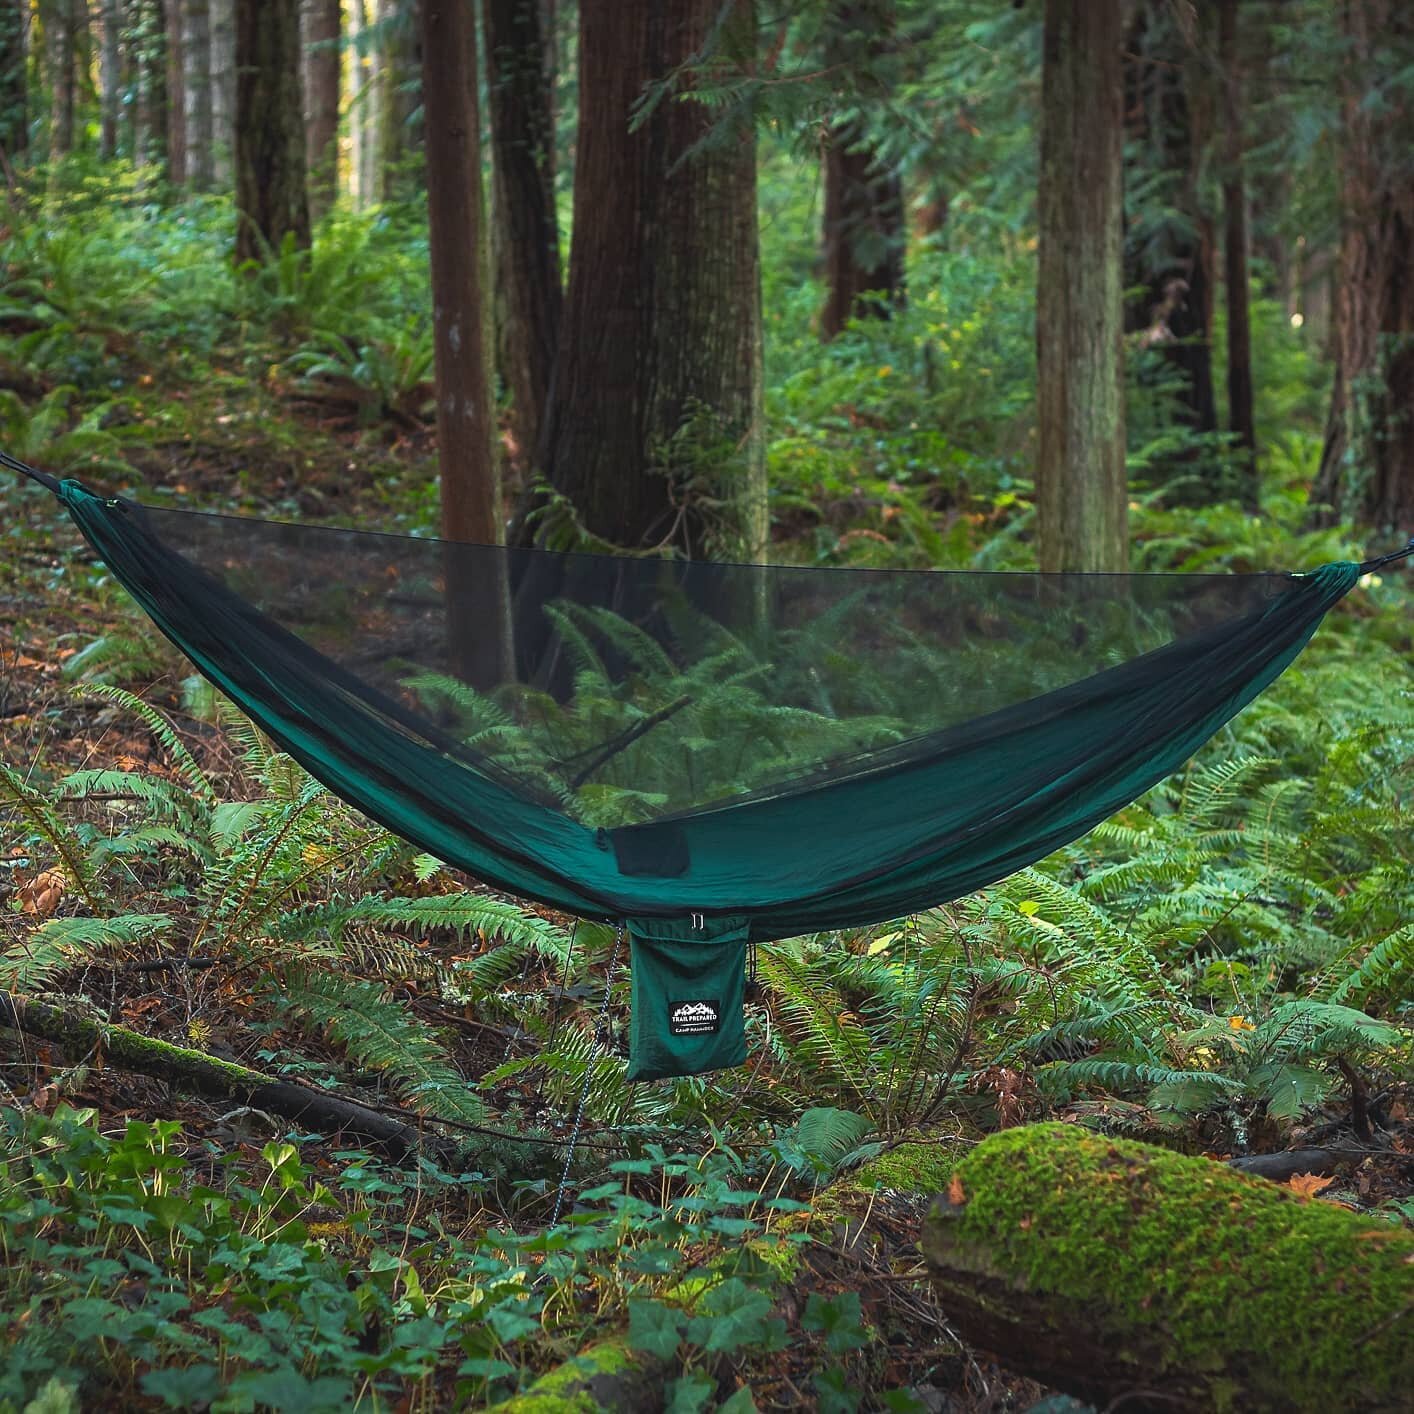 SPECIAL DUAL PRODUCT RELEASE!🏕️
We're proud to finally introduce our new Trail Prepared Camp Hammock, and Wiregate Carabiner!
Check them out in the link in our profile.
You can pick them up with our 20% off Black Friday sale! (Ends 11/30 @ 11:59pm E